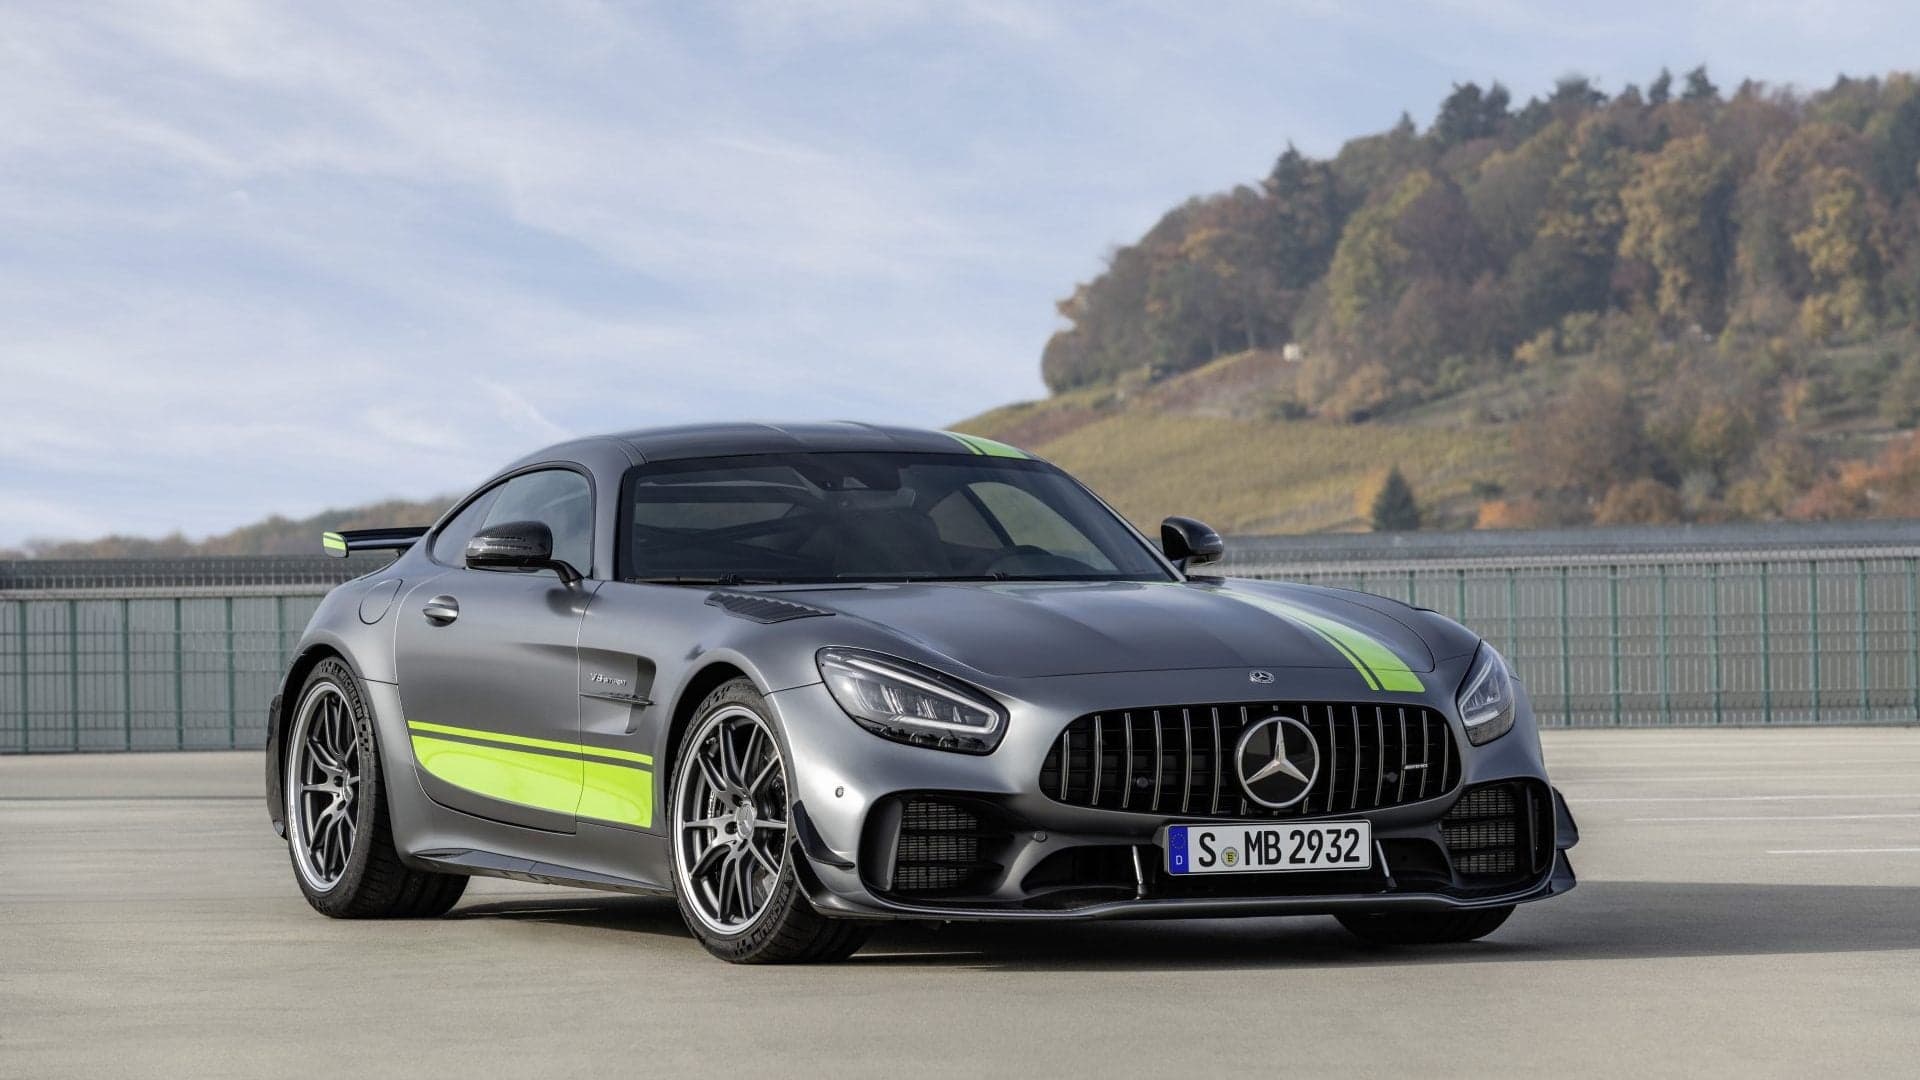 2020 Mercedes-AMG GT R Pro: Tightened, Lightened, and Limited